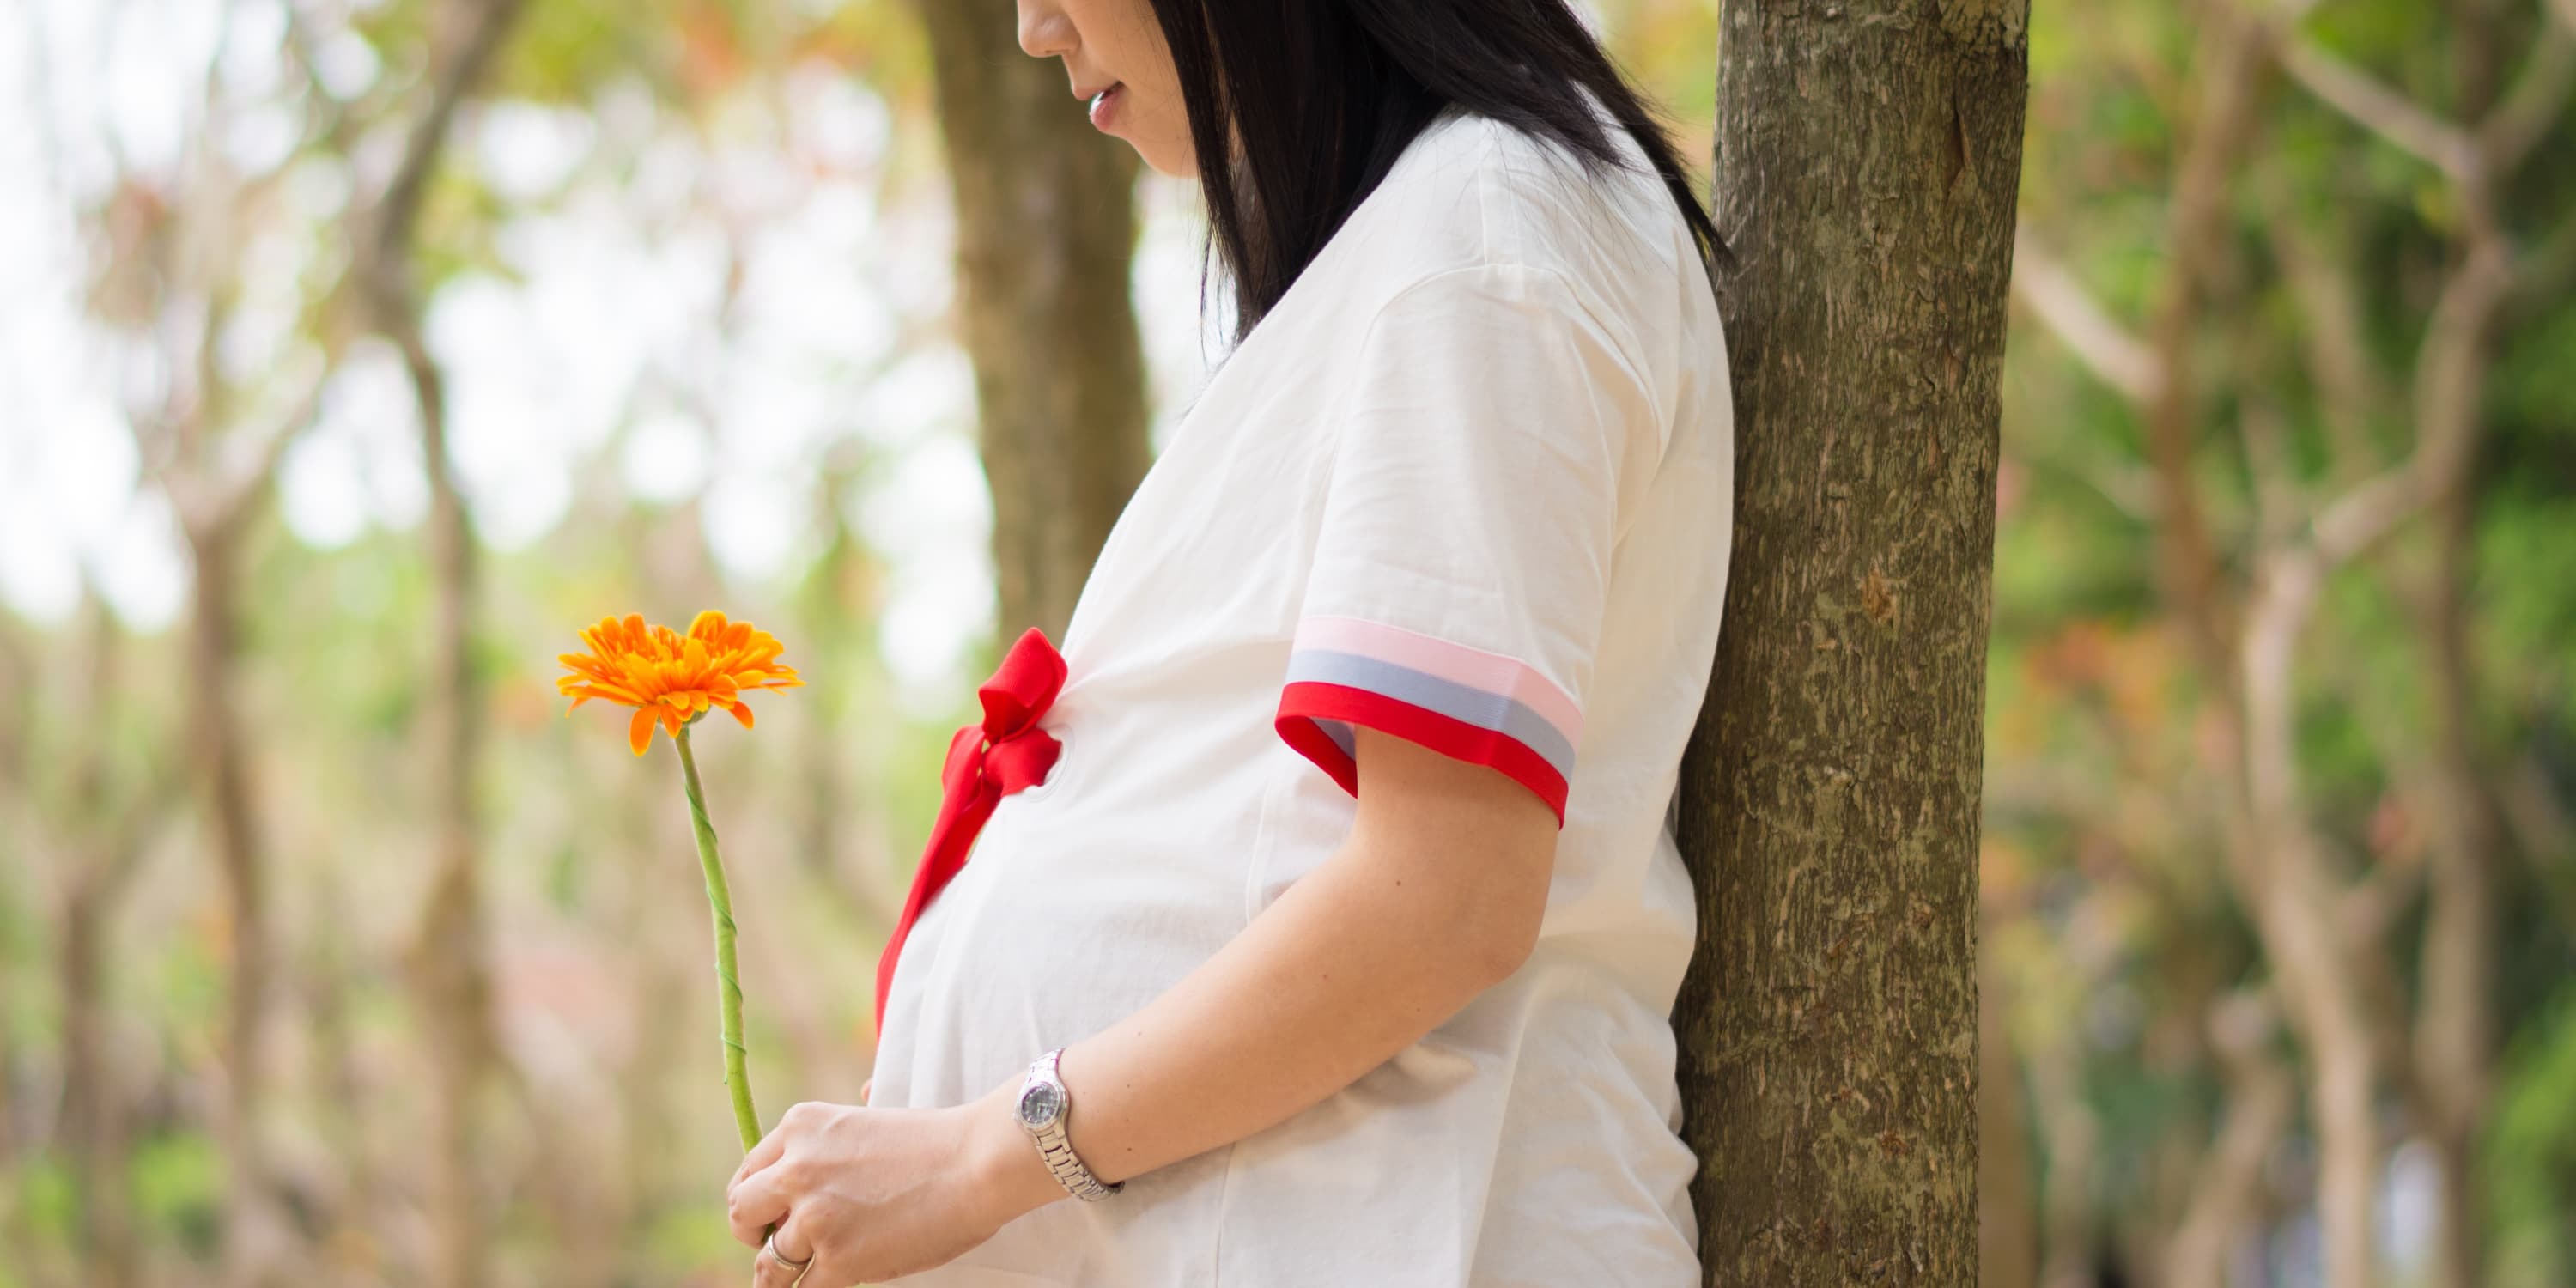 Side view: Pregnant woman stands beneath a tree and holds a flower in her hands